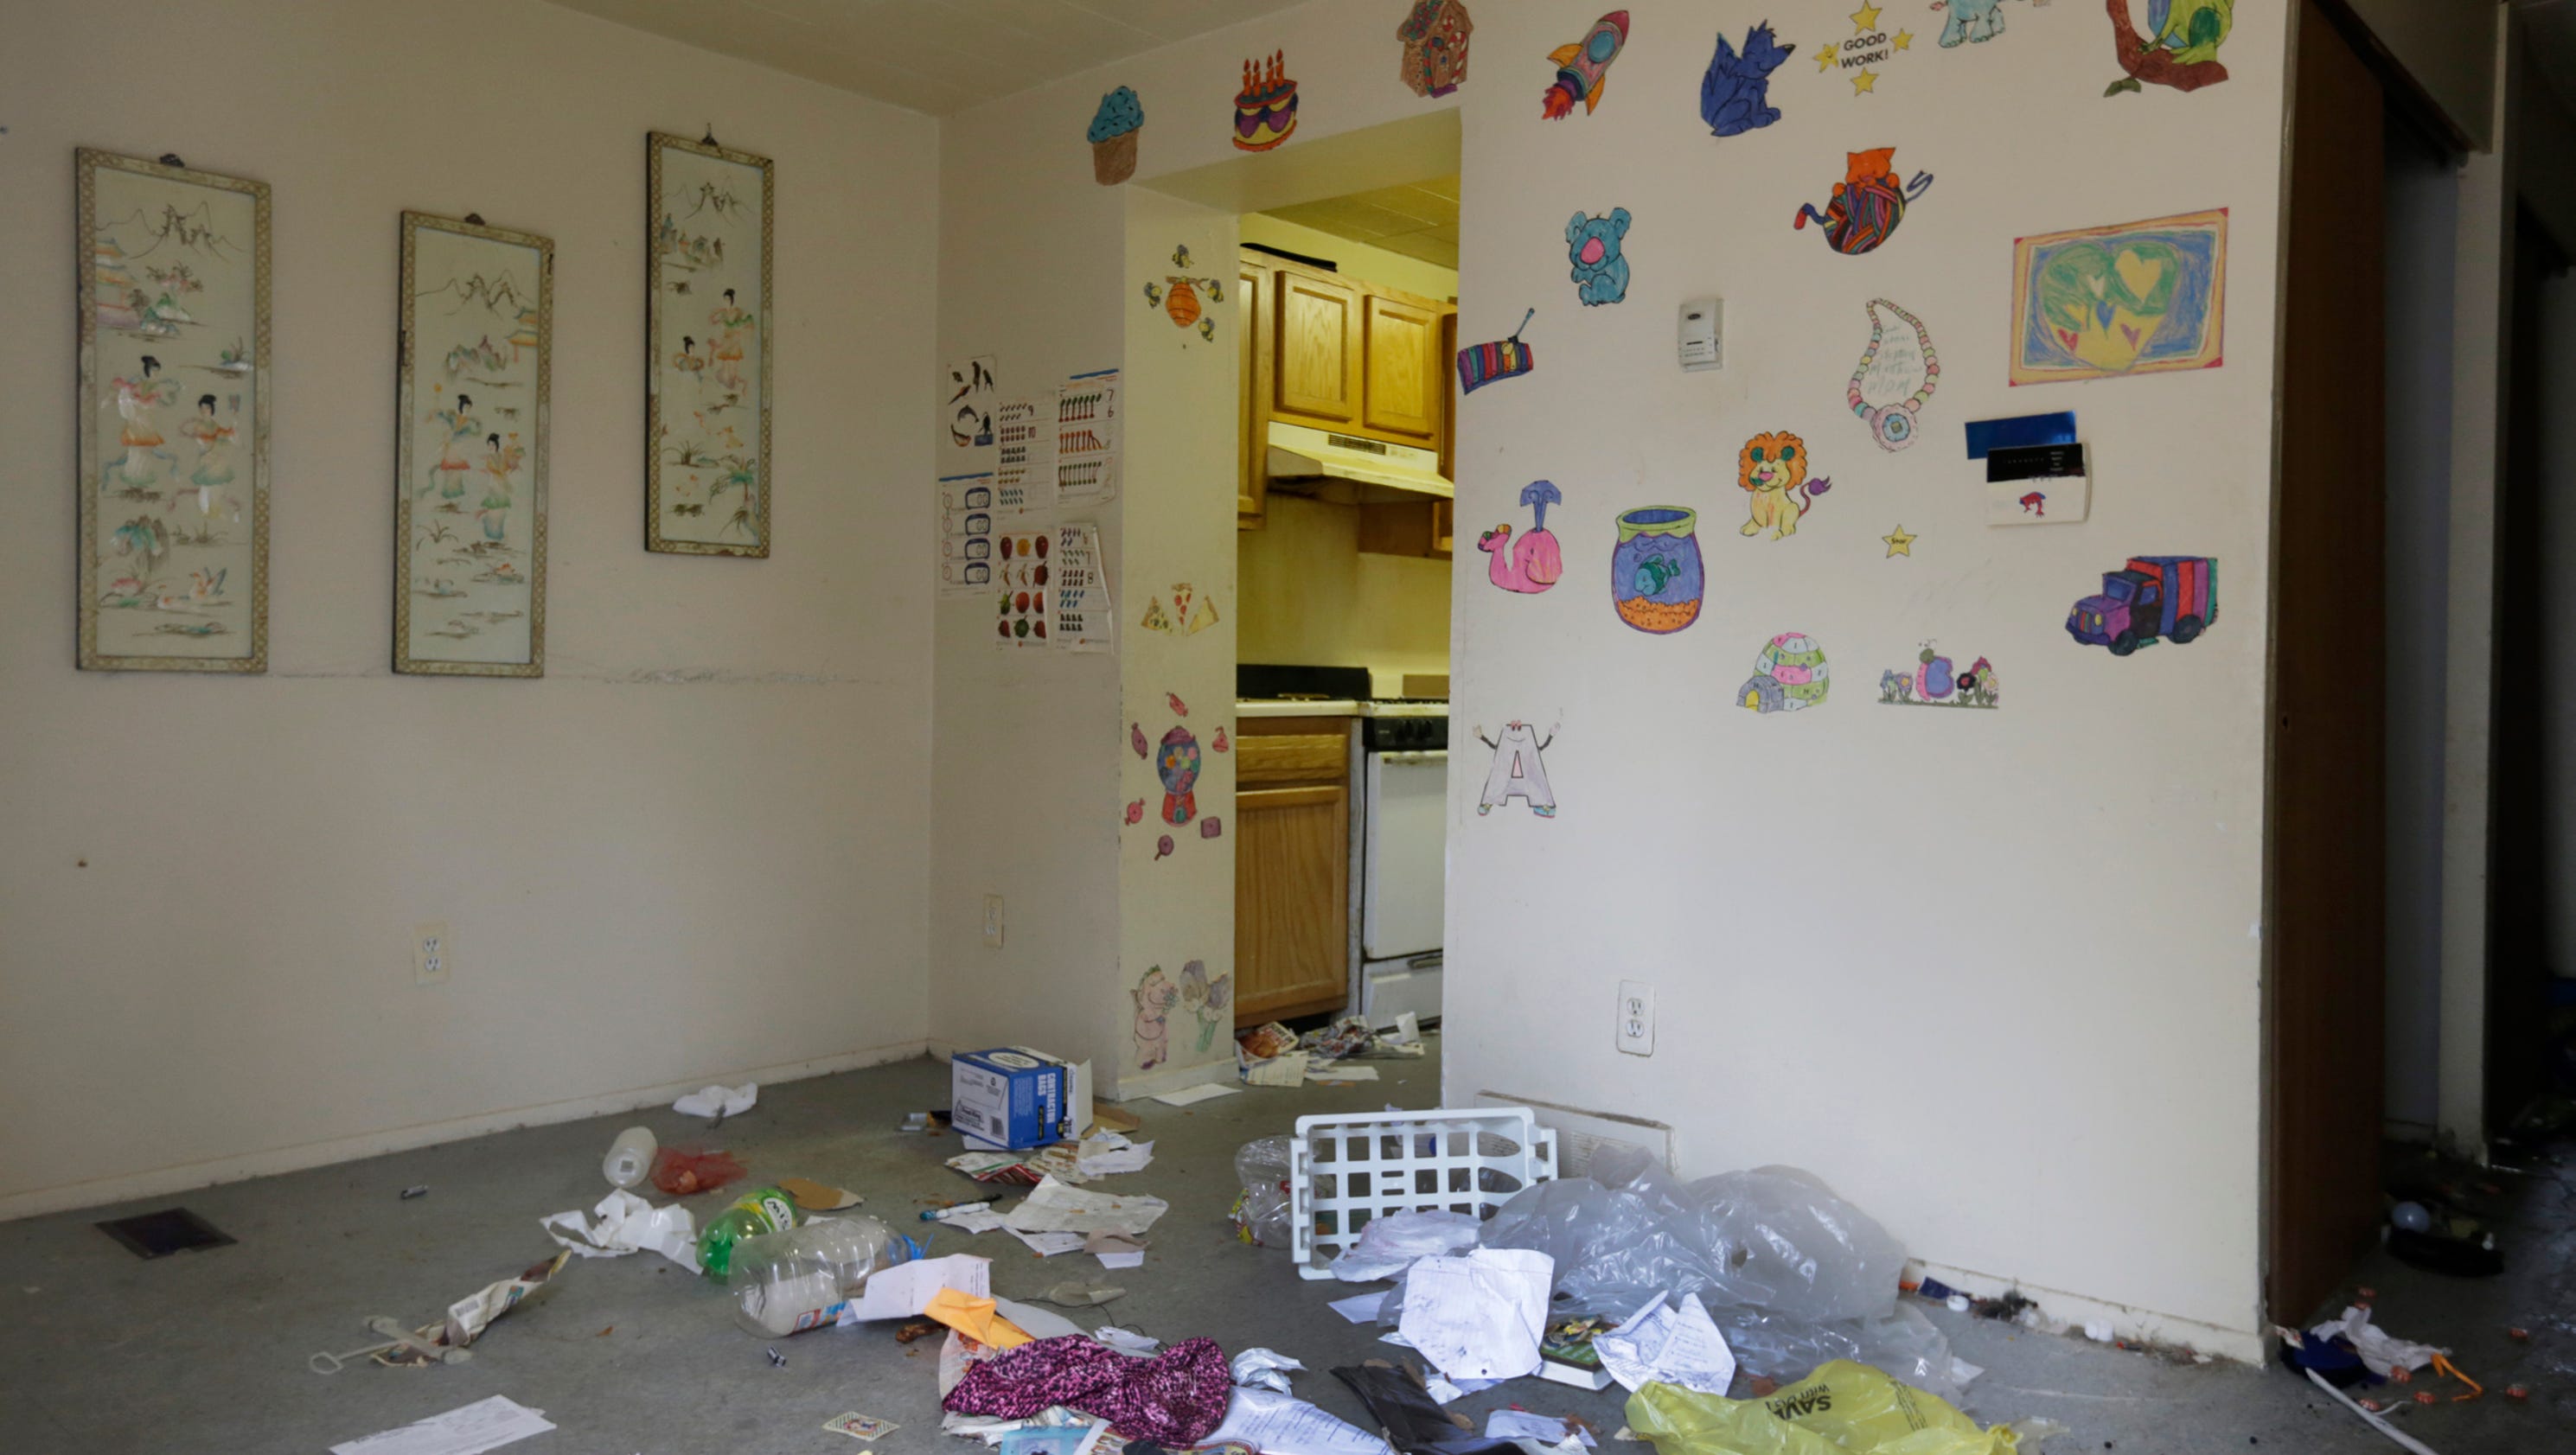 Eviction crew empties home of kids found in freezer3200 x 1680